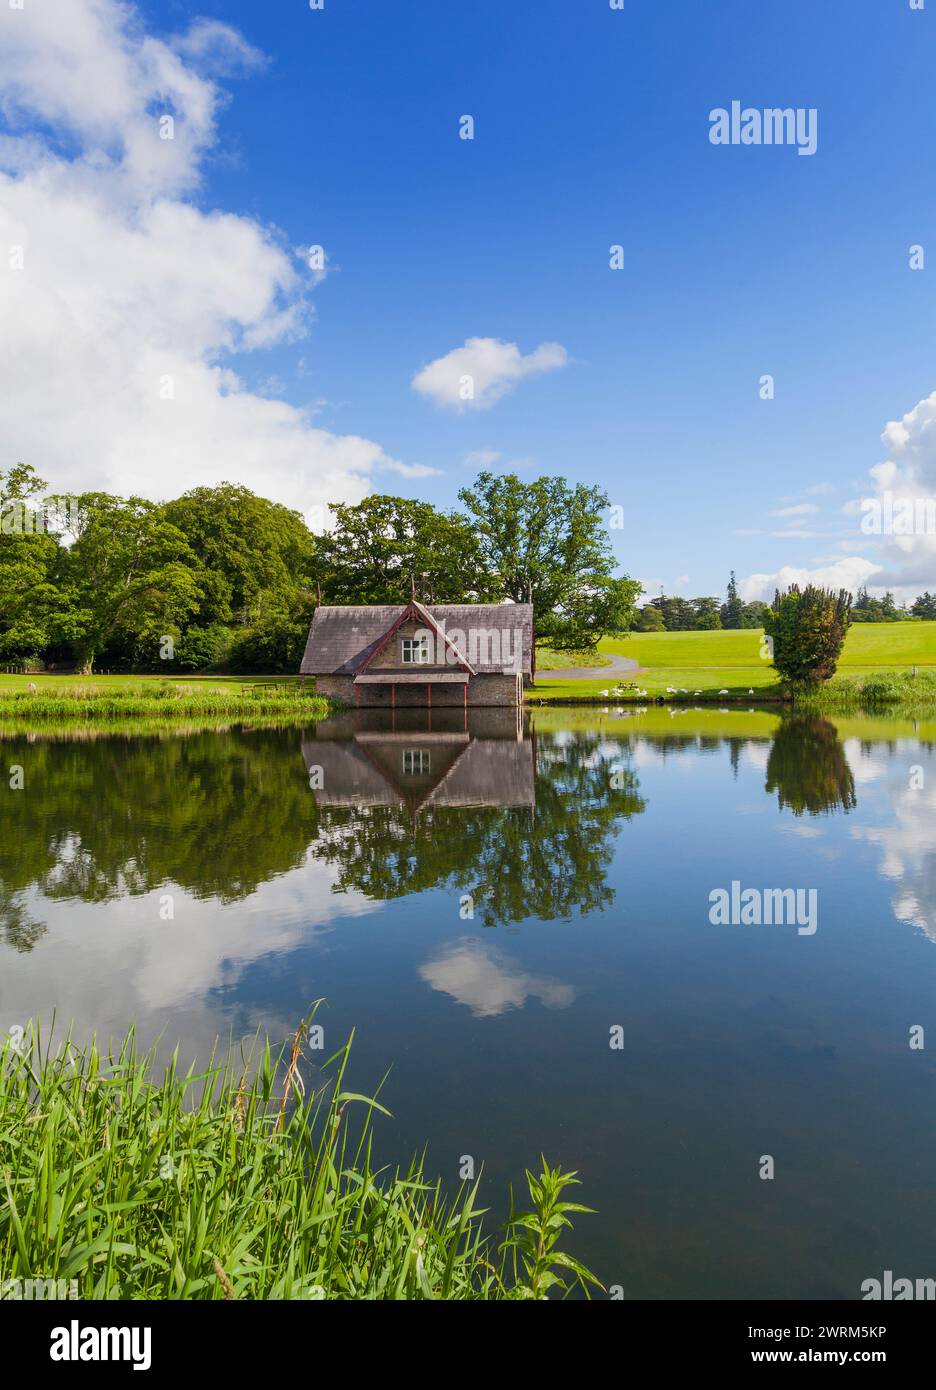 The 19th-century Boat House,on Rye Water in the Carton House estate  in County KIldare, Ireland, Stock Photo